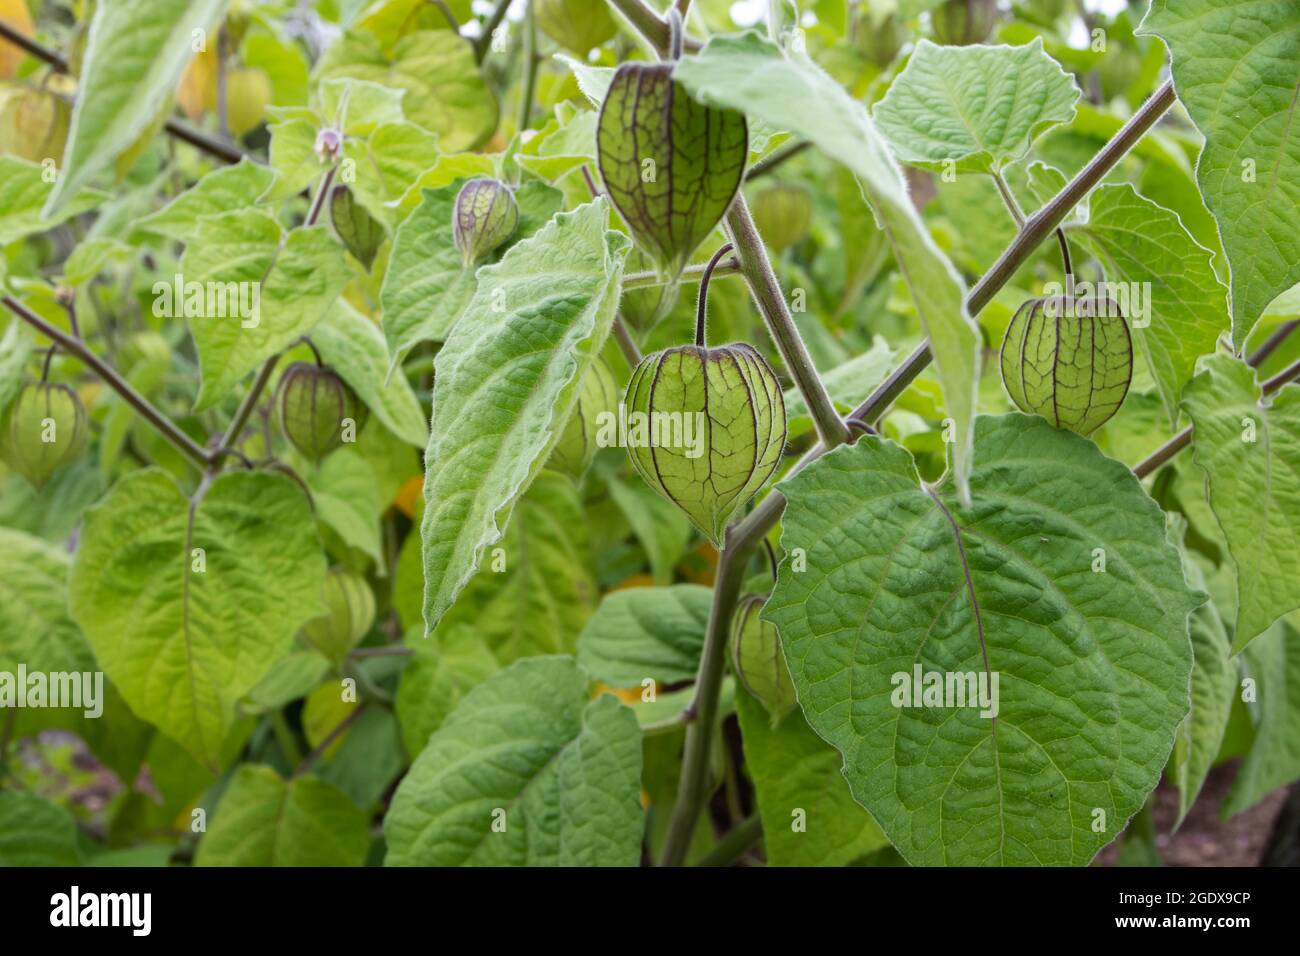 Goldenberry or Cape gooseberry plants with hairy leaves and immature fruits in green calyx. Physalis peruviana. Stock Photo